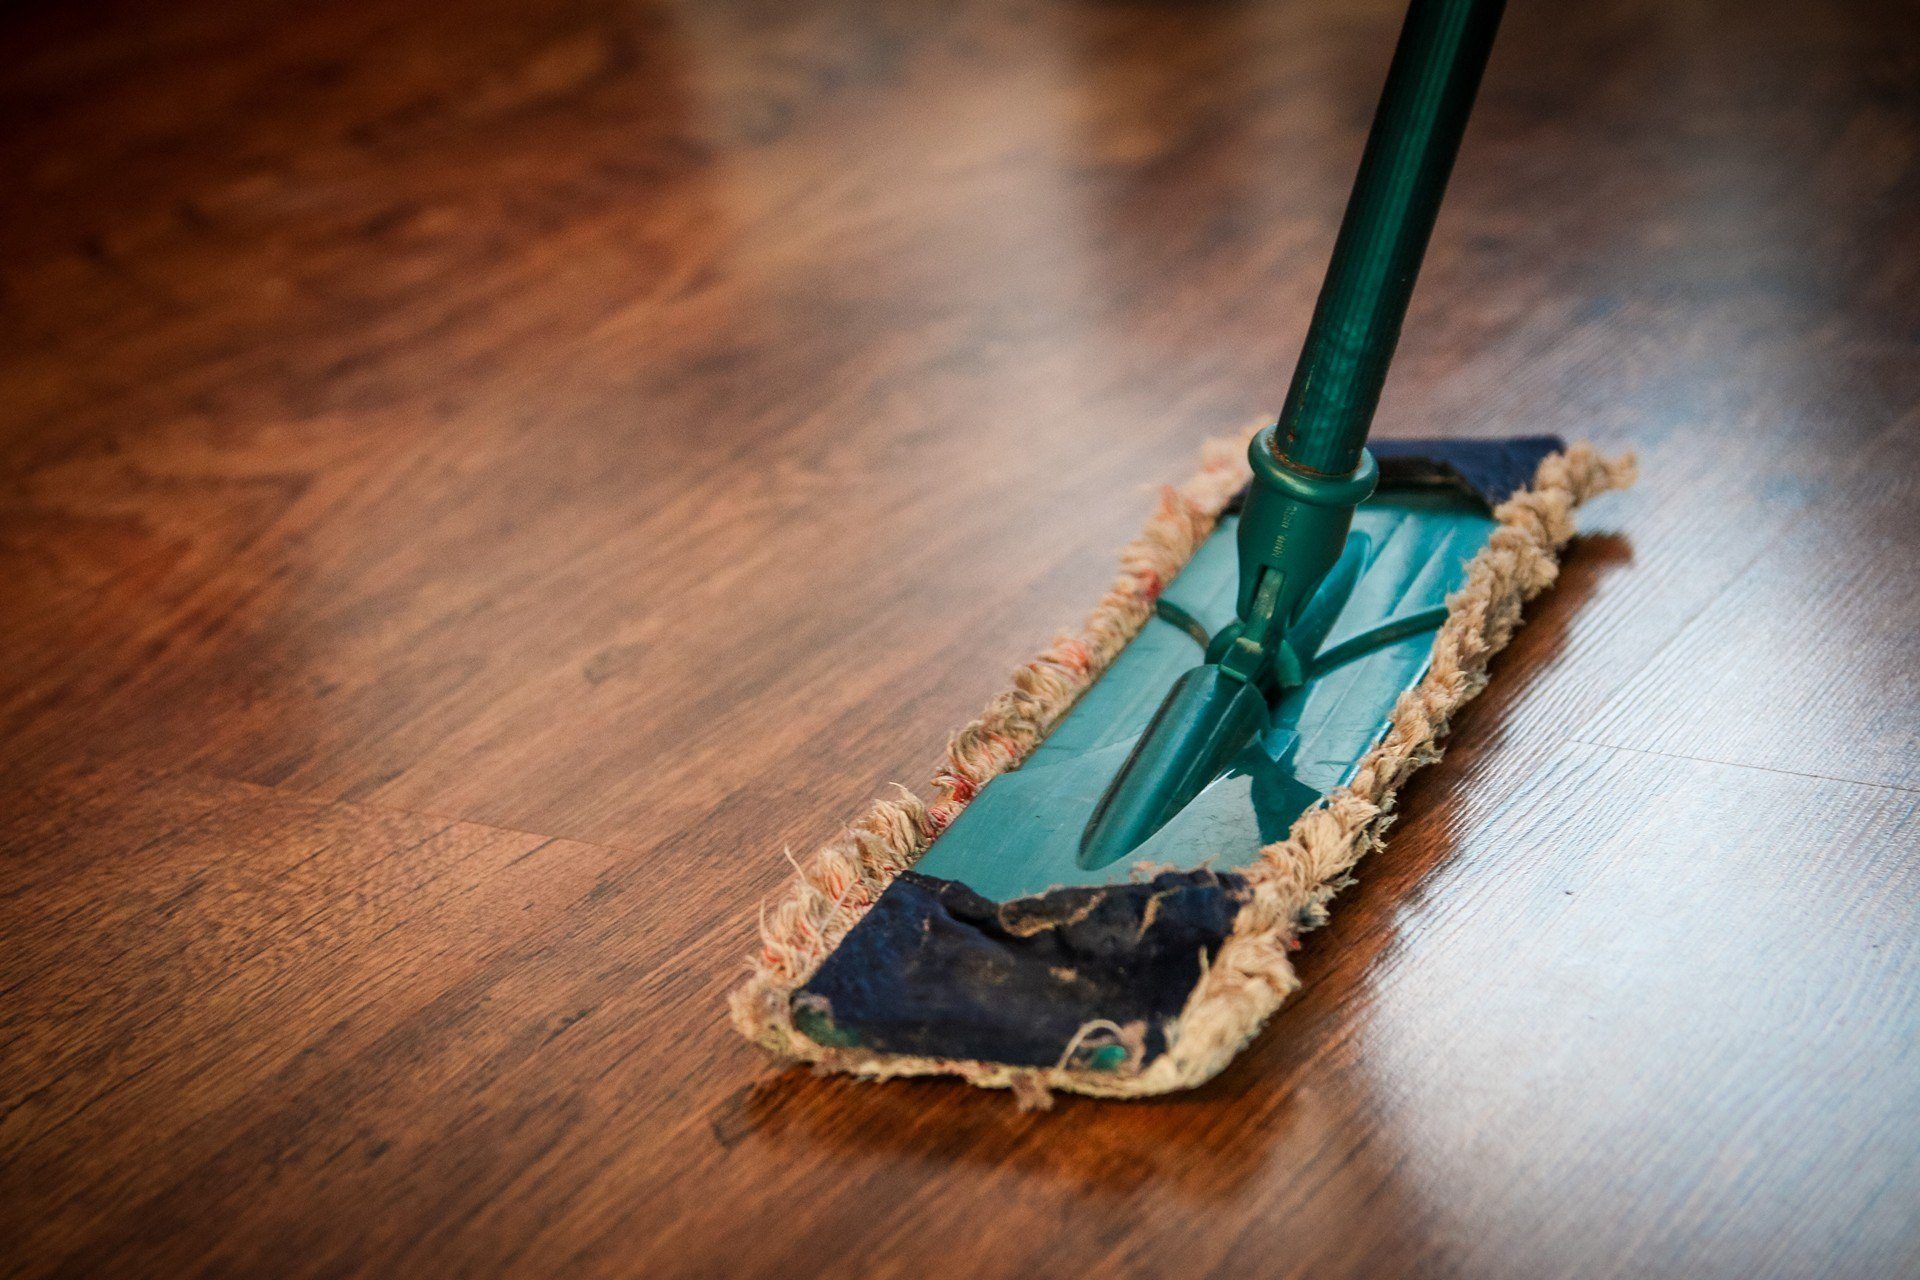 Green cleaning mop.